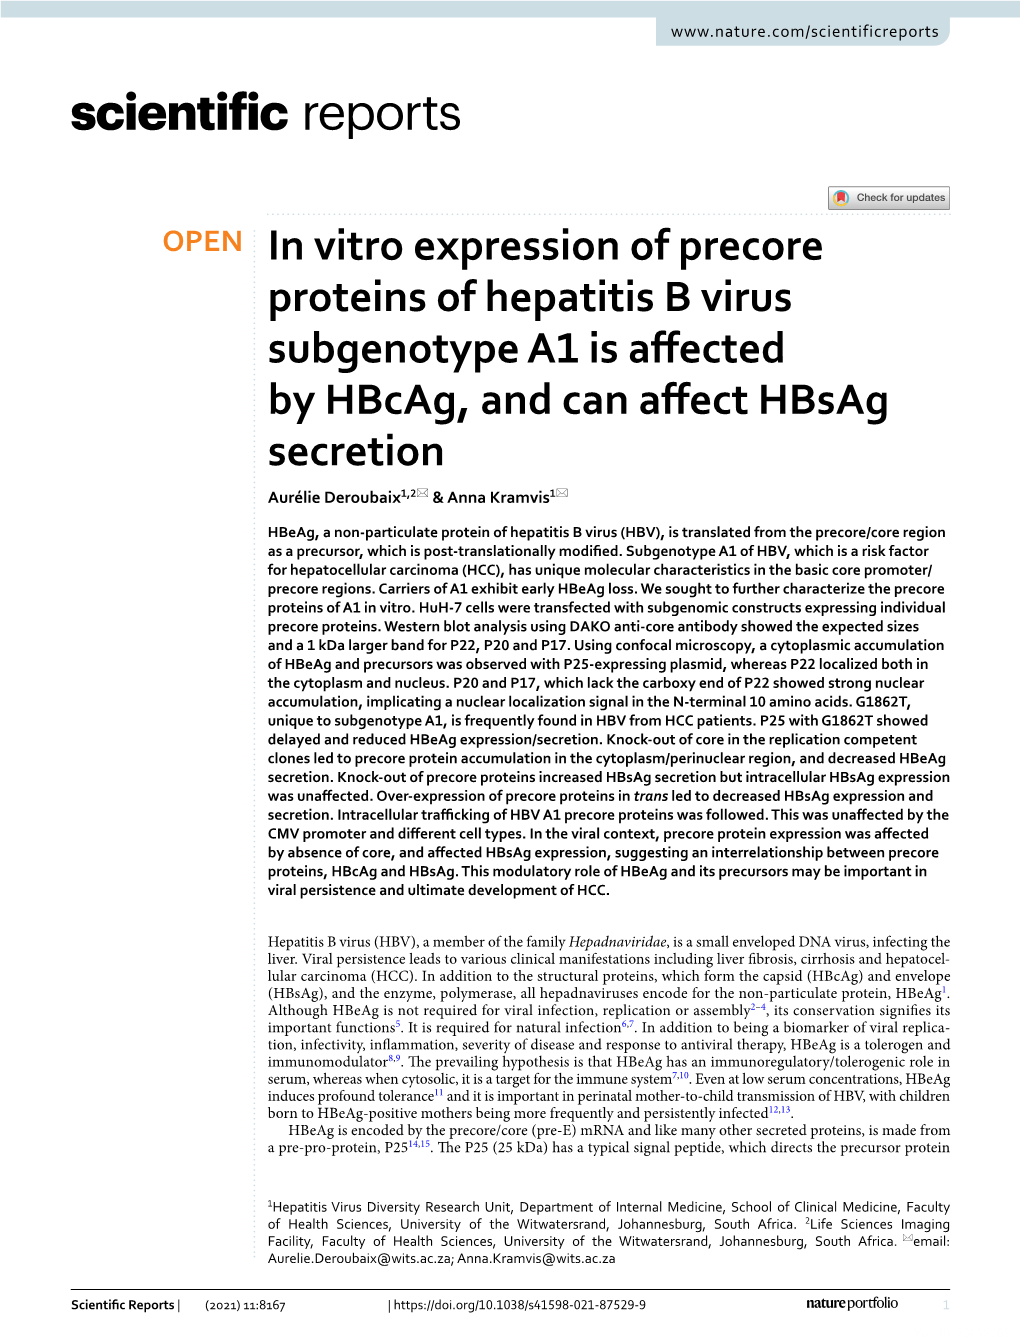 In Vitro Expression of Precore Proteins of Hepatitis B Virus Subgenotype A1 Is Affected by Hbcag, and Can Affect Hbsag Secretion